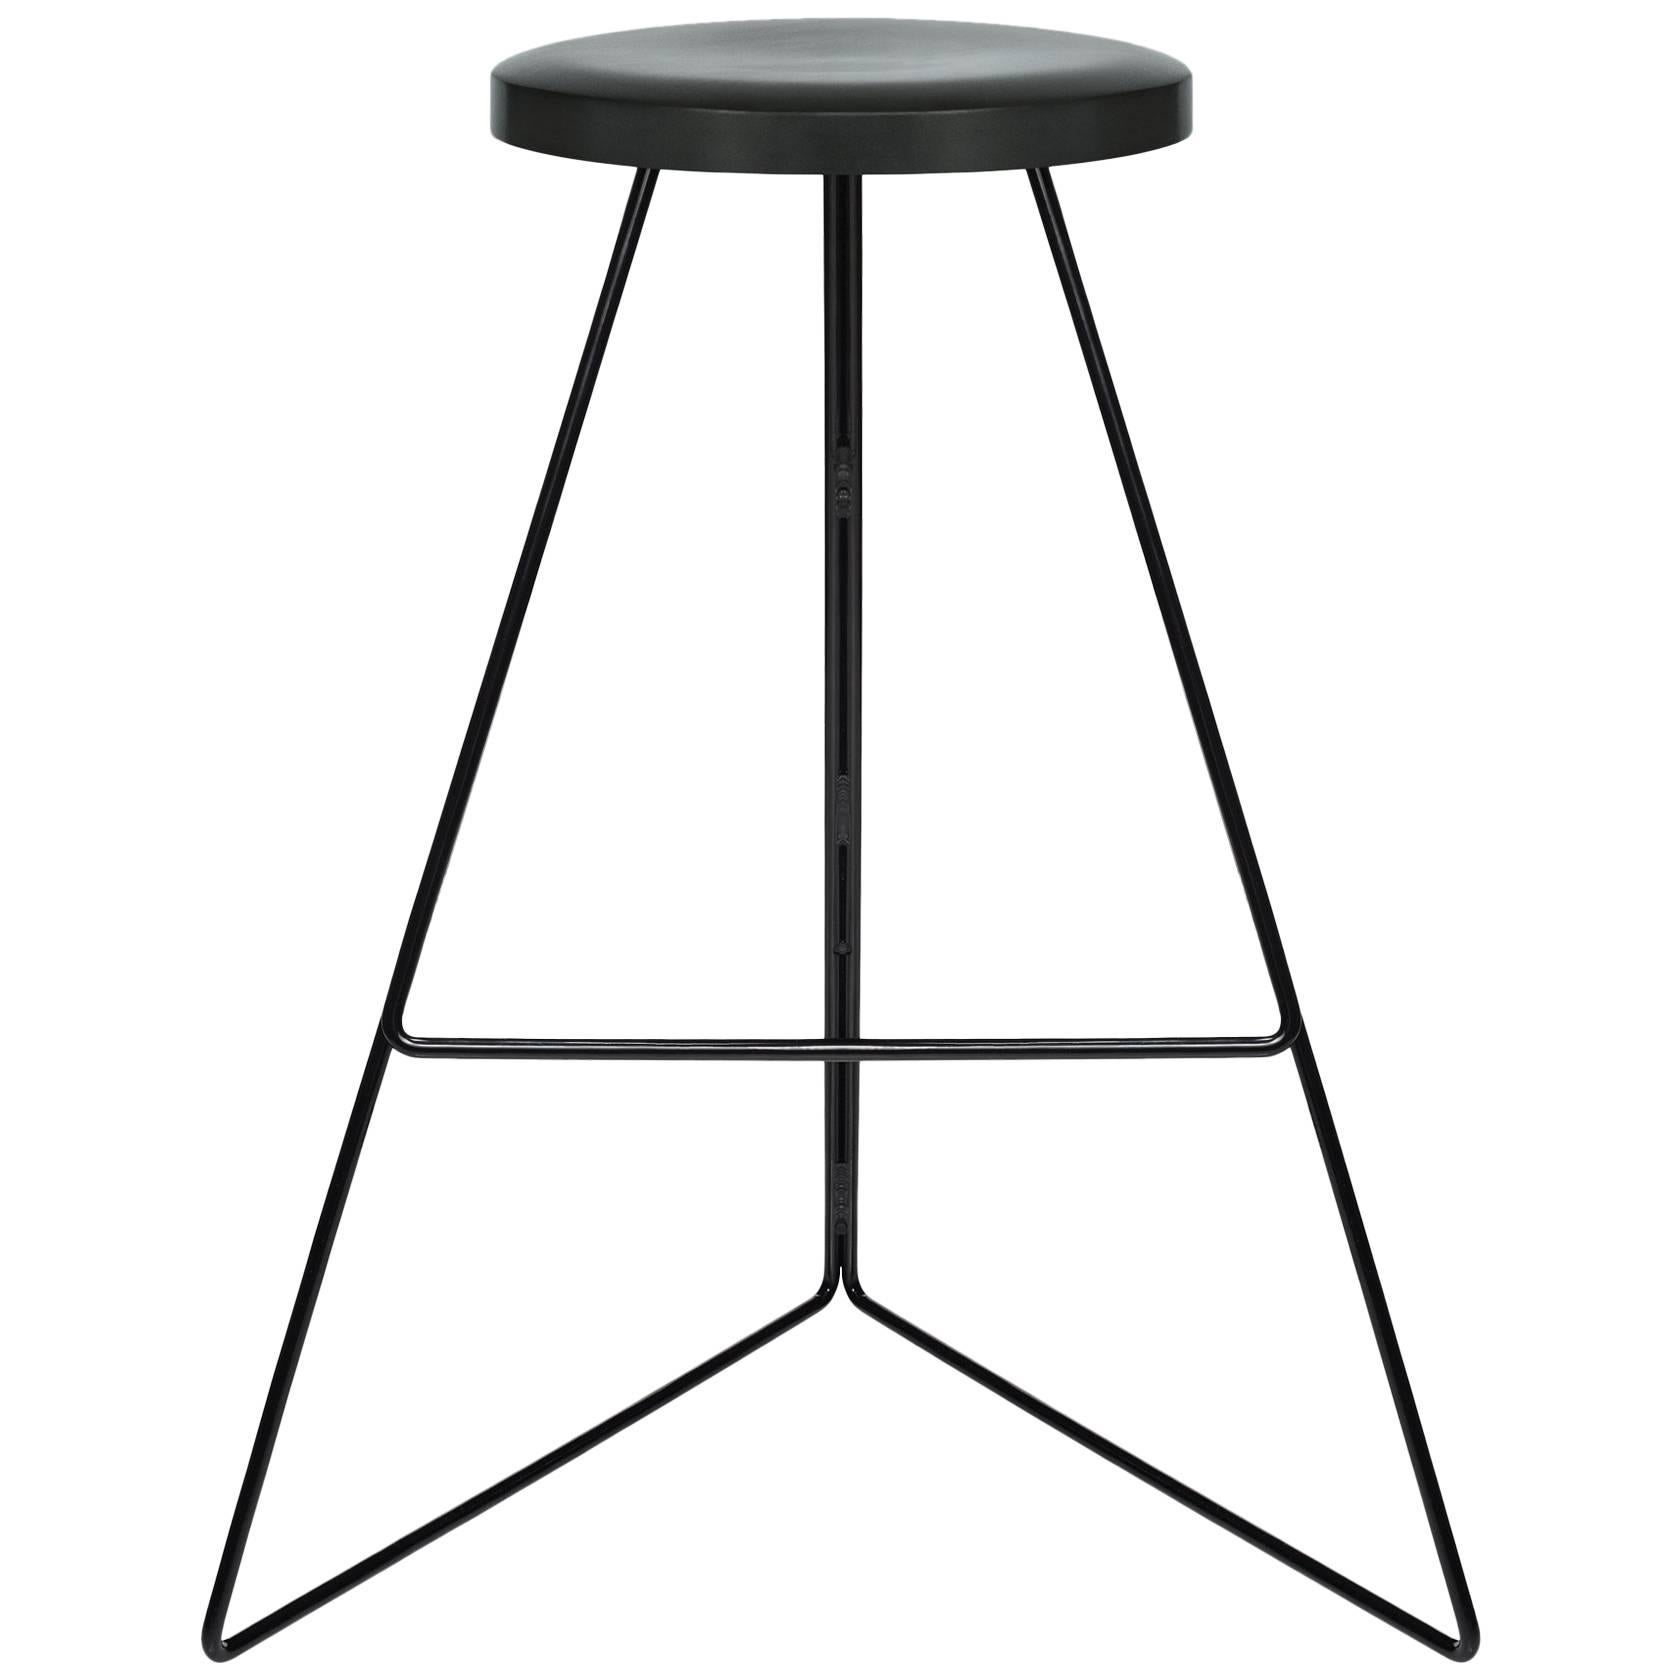 The Coleman Stool - Black and Charcoal, 24" Counter Height. 54 Variations. For Sale